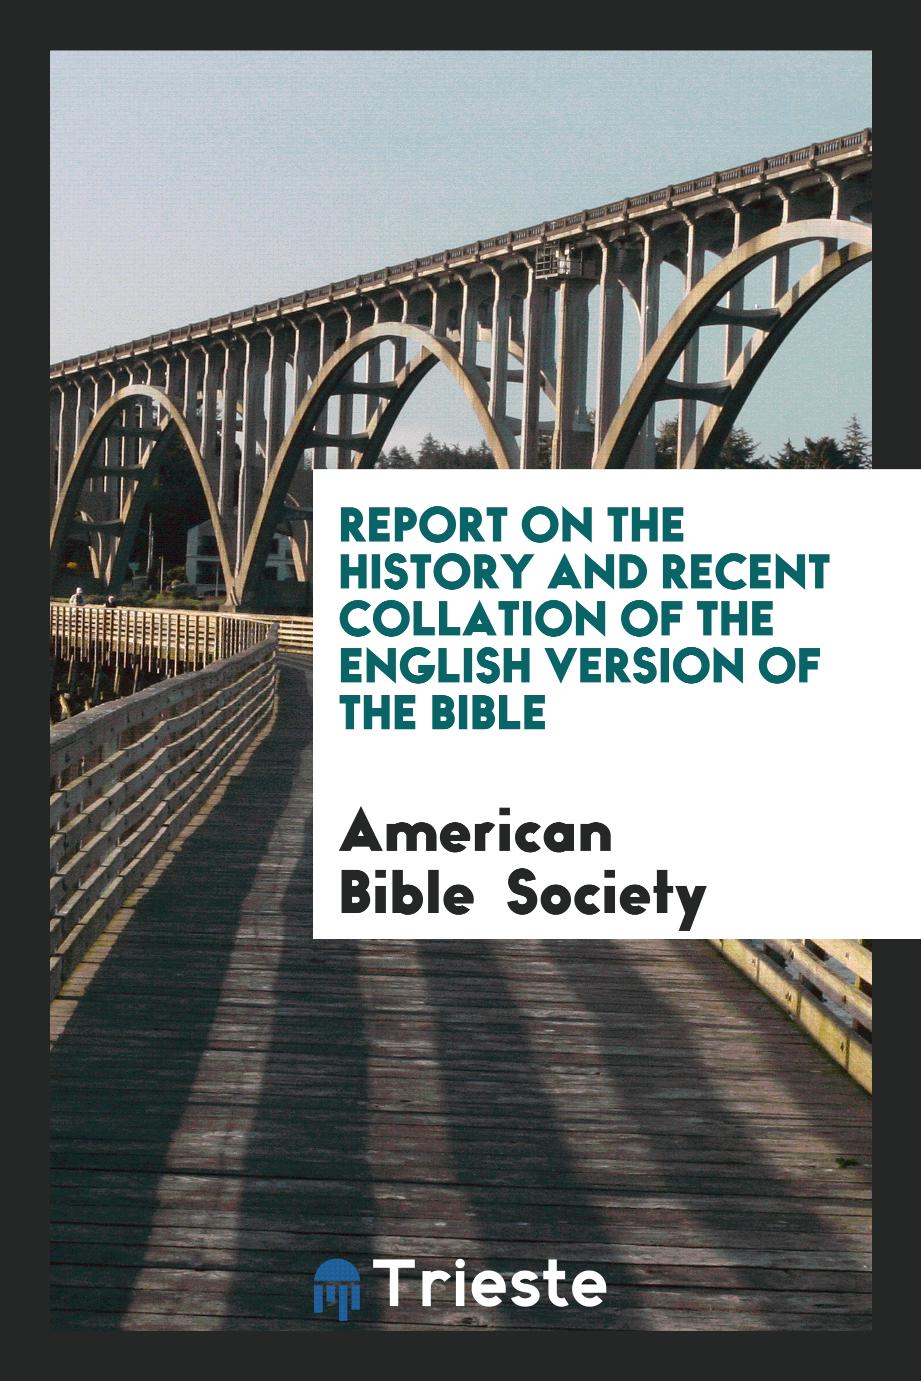 Report on the history and recent collation of the English version of the Bible